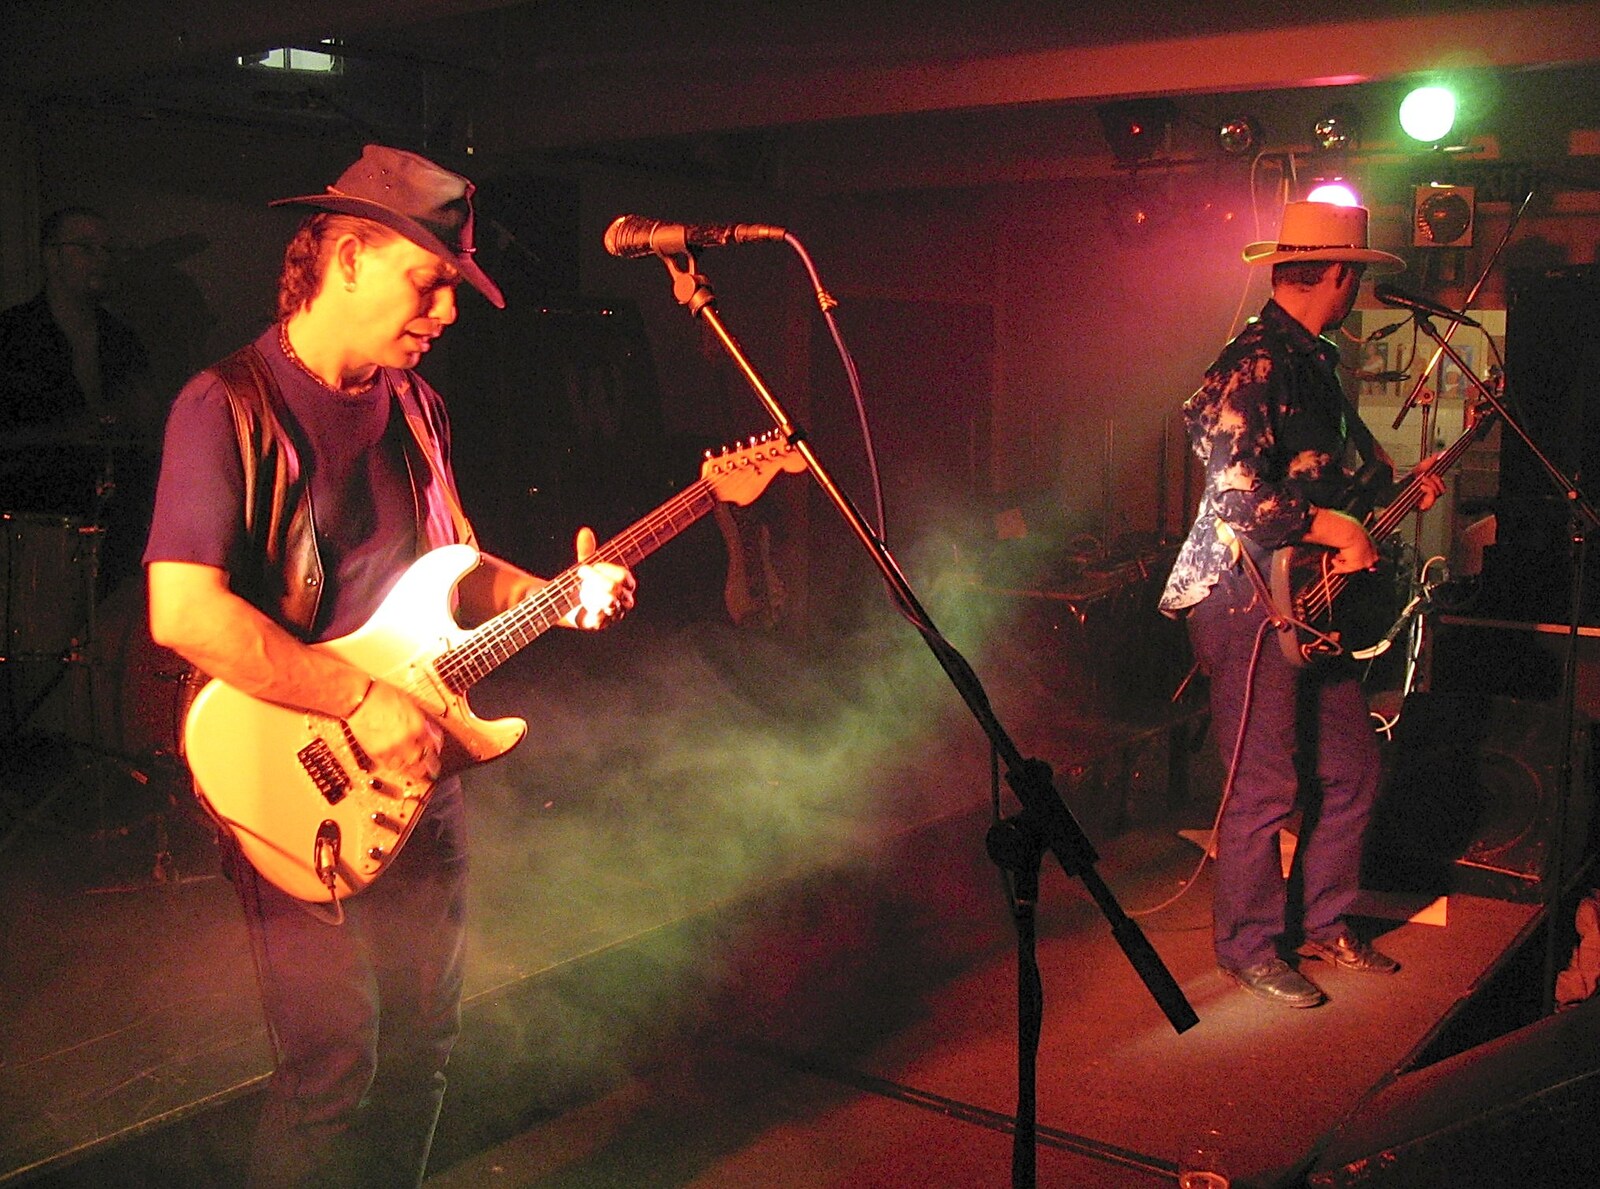 A bit of dry-ice smoke for extra effect from A CISU Blues Festival at the SCC Social Club, Ipswich, Suffolk - 27th November 2004